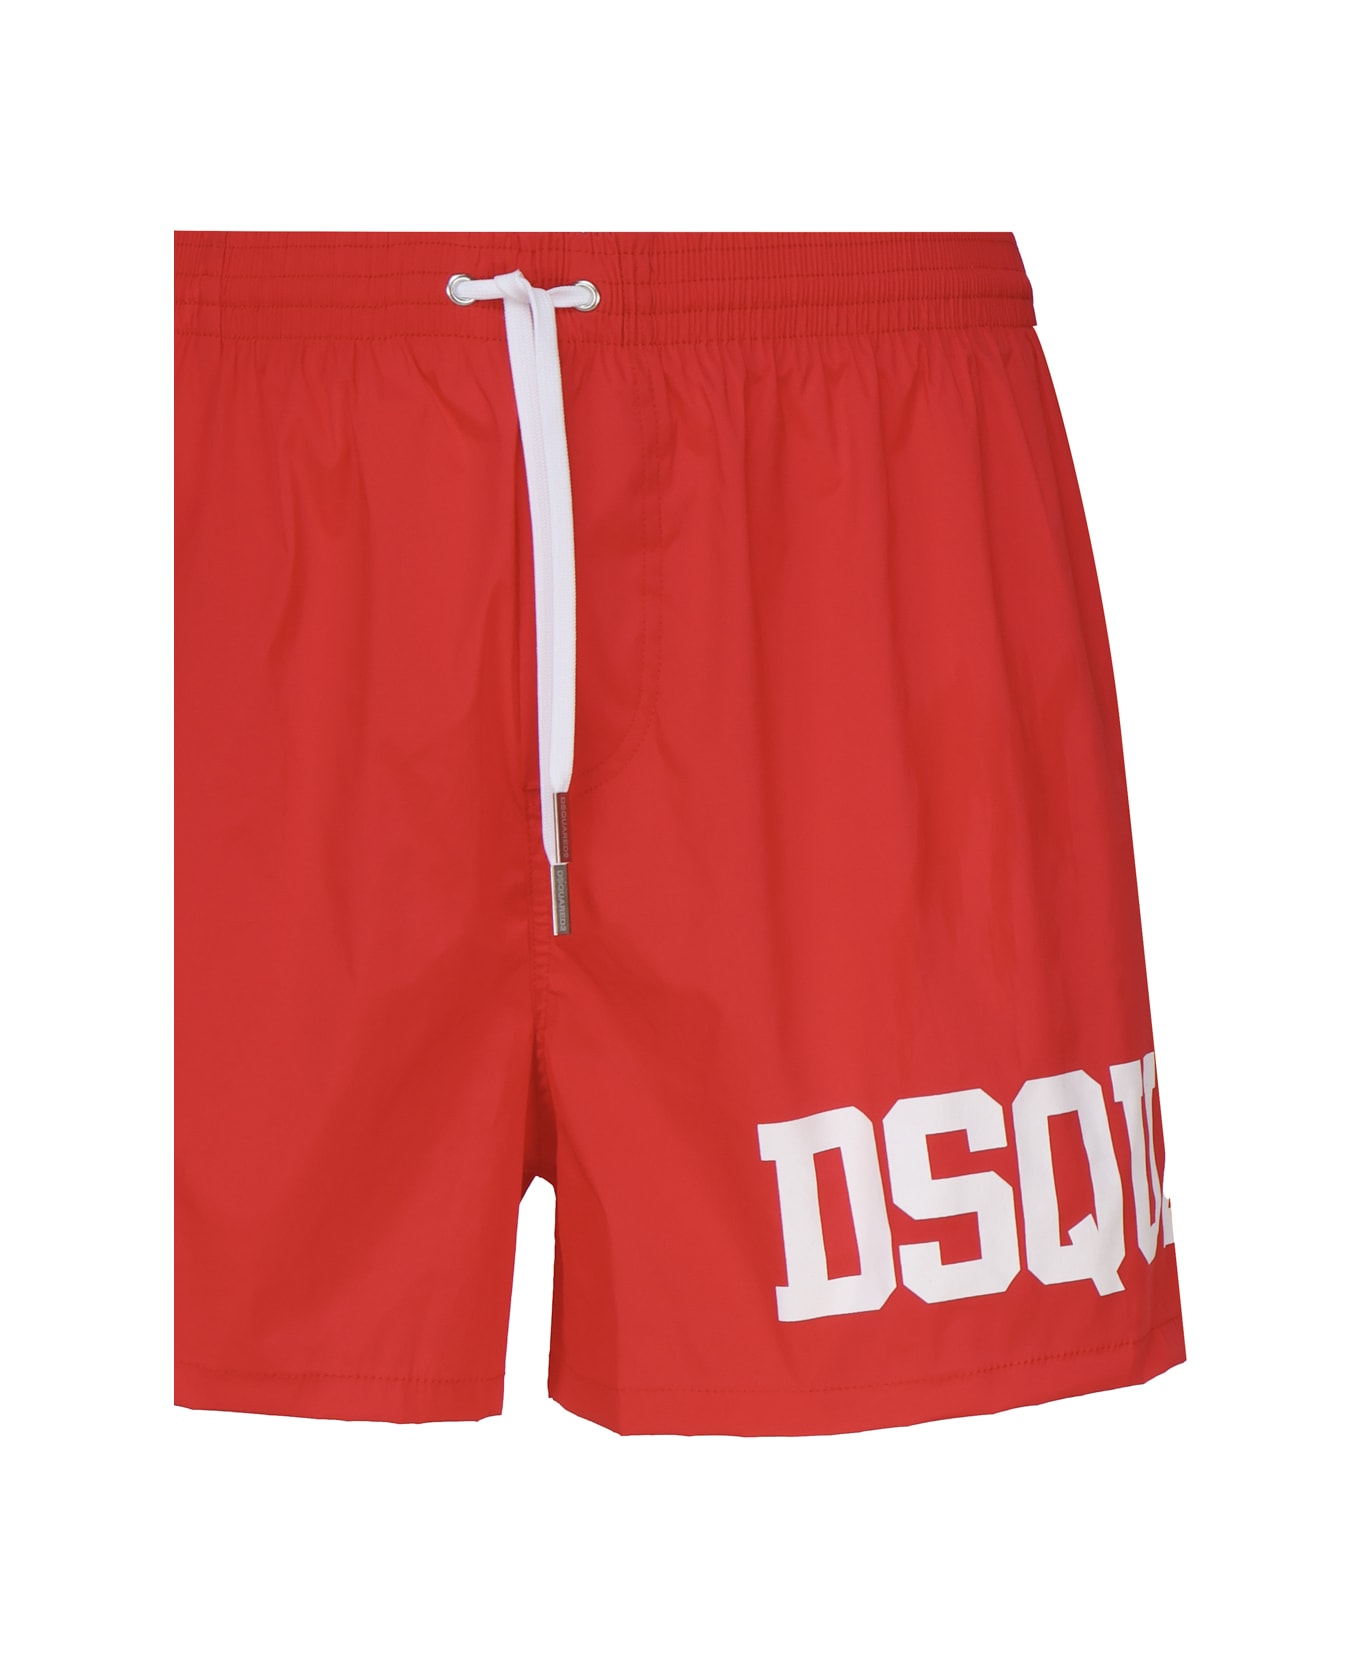 Dsquared2 Logo Swimsuit In Contrasting Color - Red/white